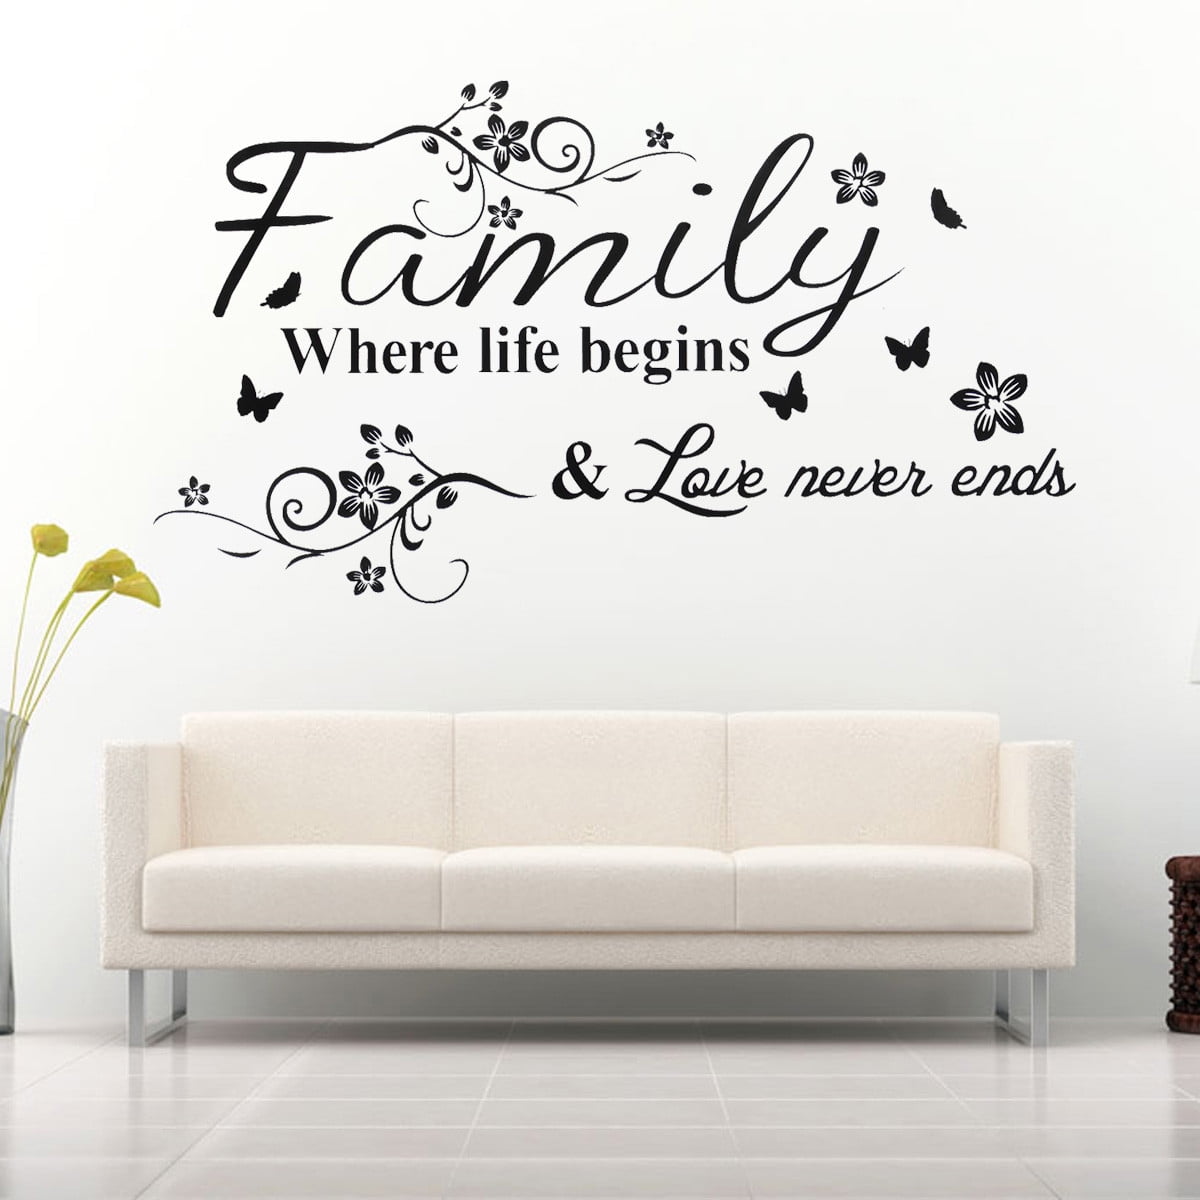 FAMILY HOME HOUSE Wall Quote Sticker Vinyl Art Decal Transfer Mural Stencil Deco 